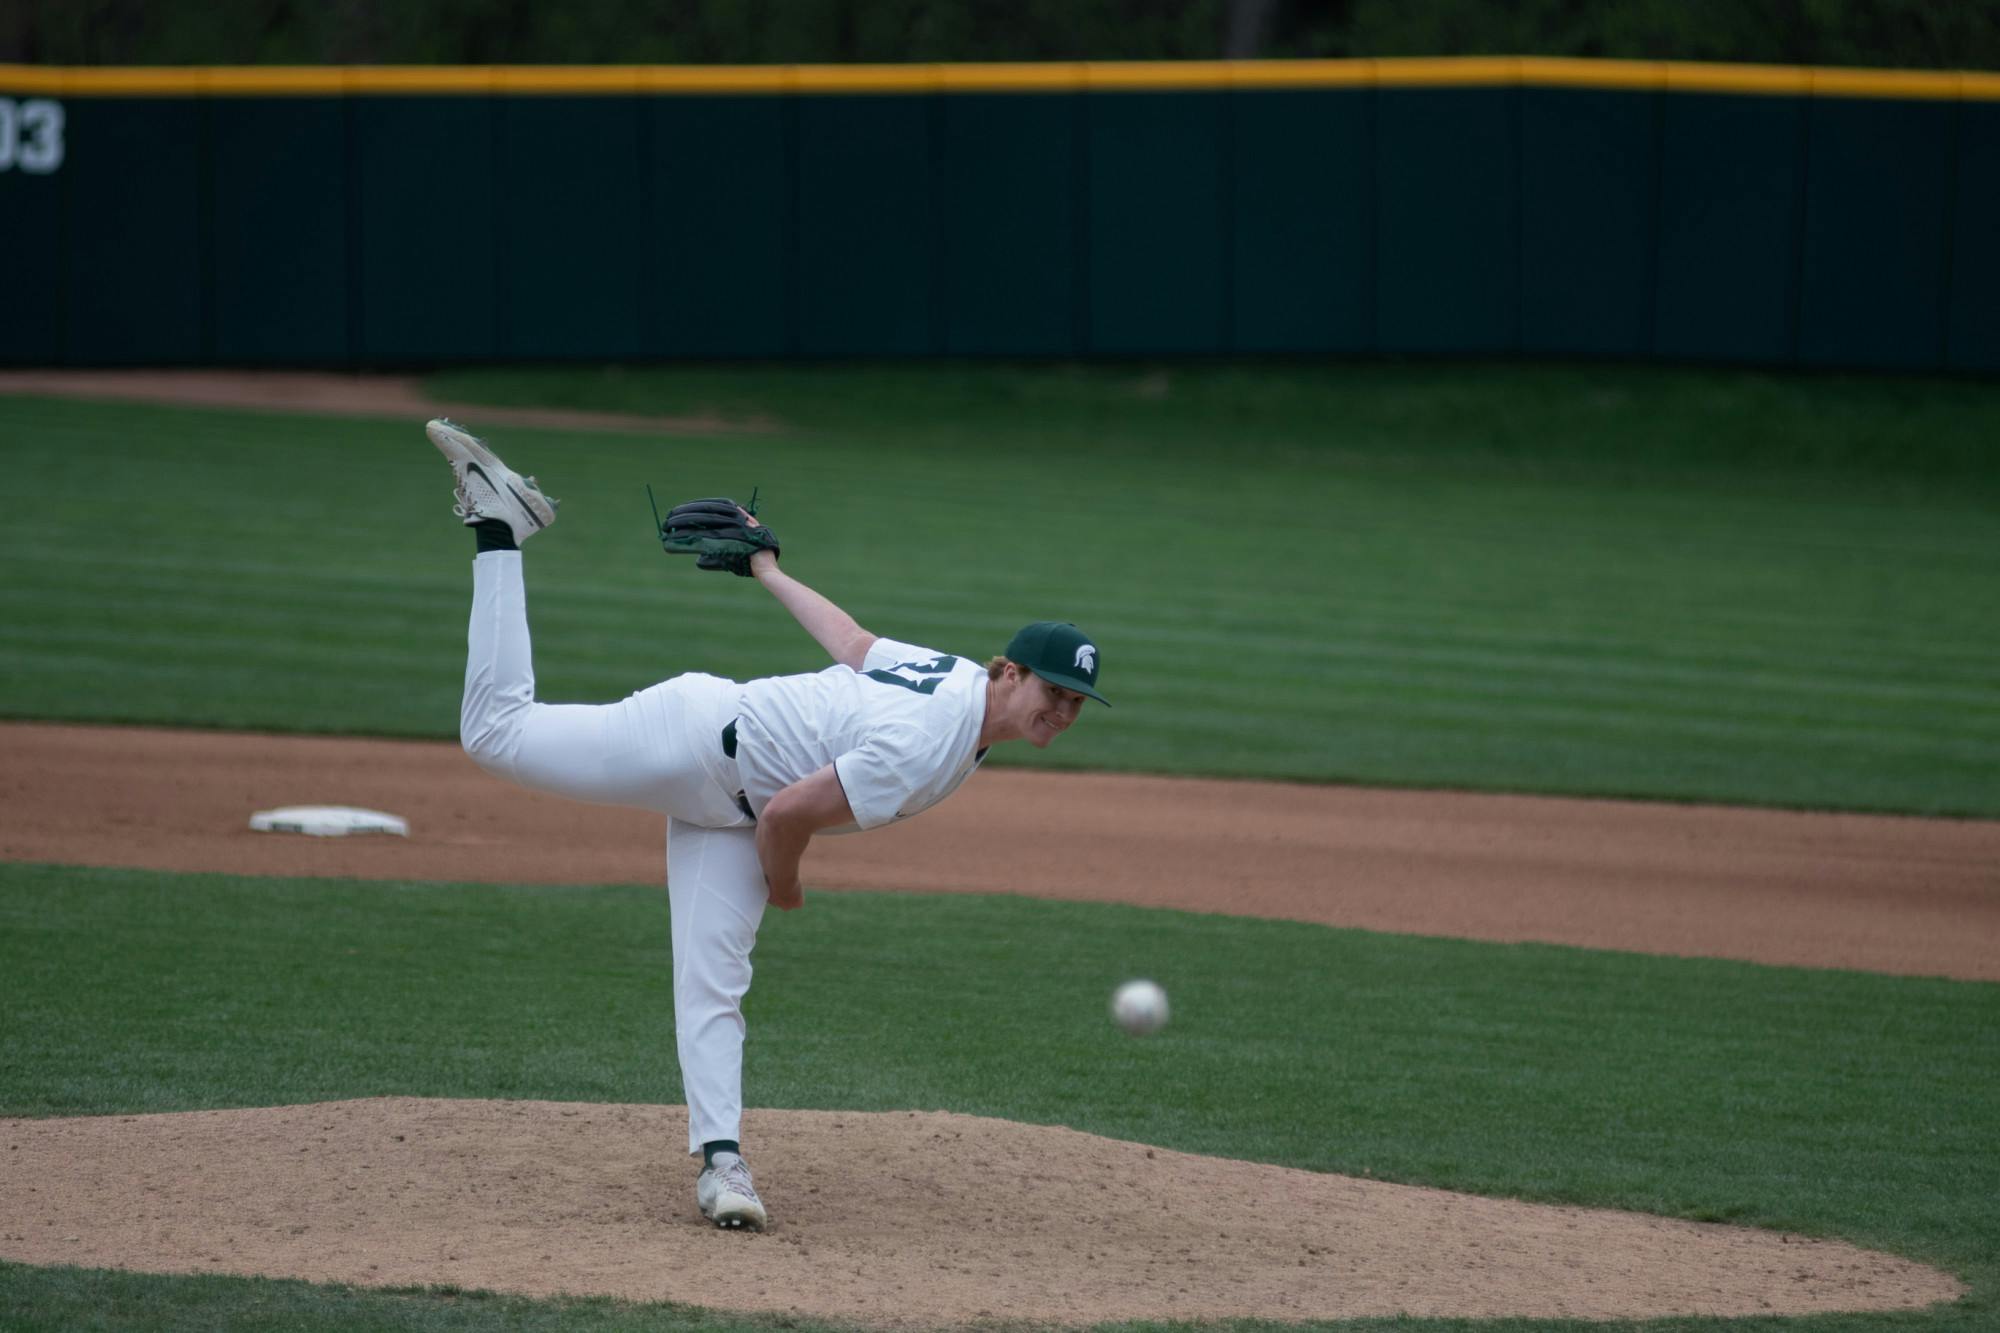 Michigan State's Nick Smith (37) pitching in the game against Purdue on April 12, 2021 at McLane Stadium at Kob's Field in East Lansing. The Spartans lost 8-2.
